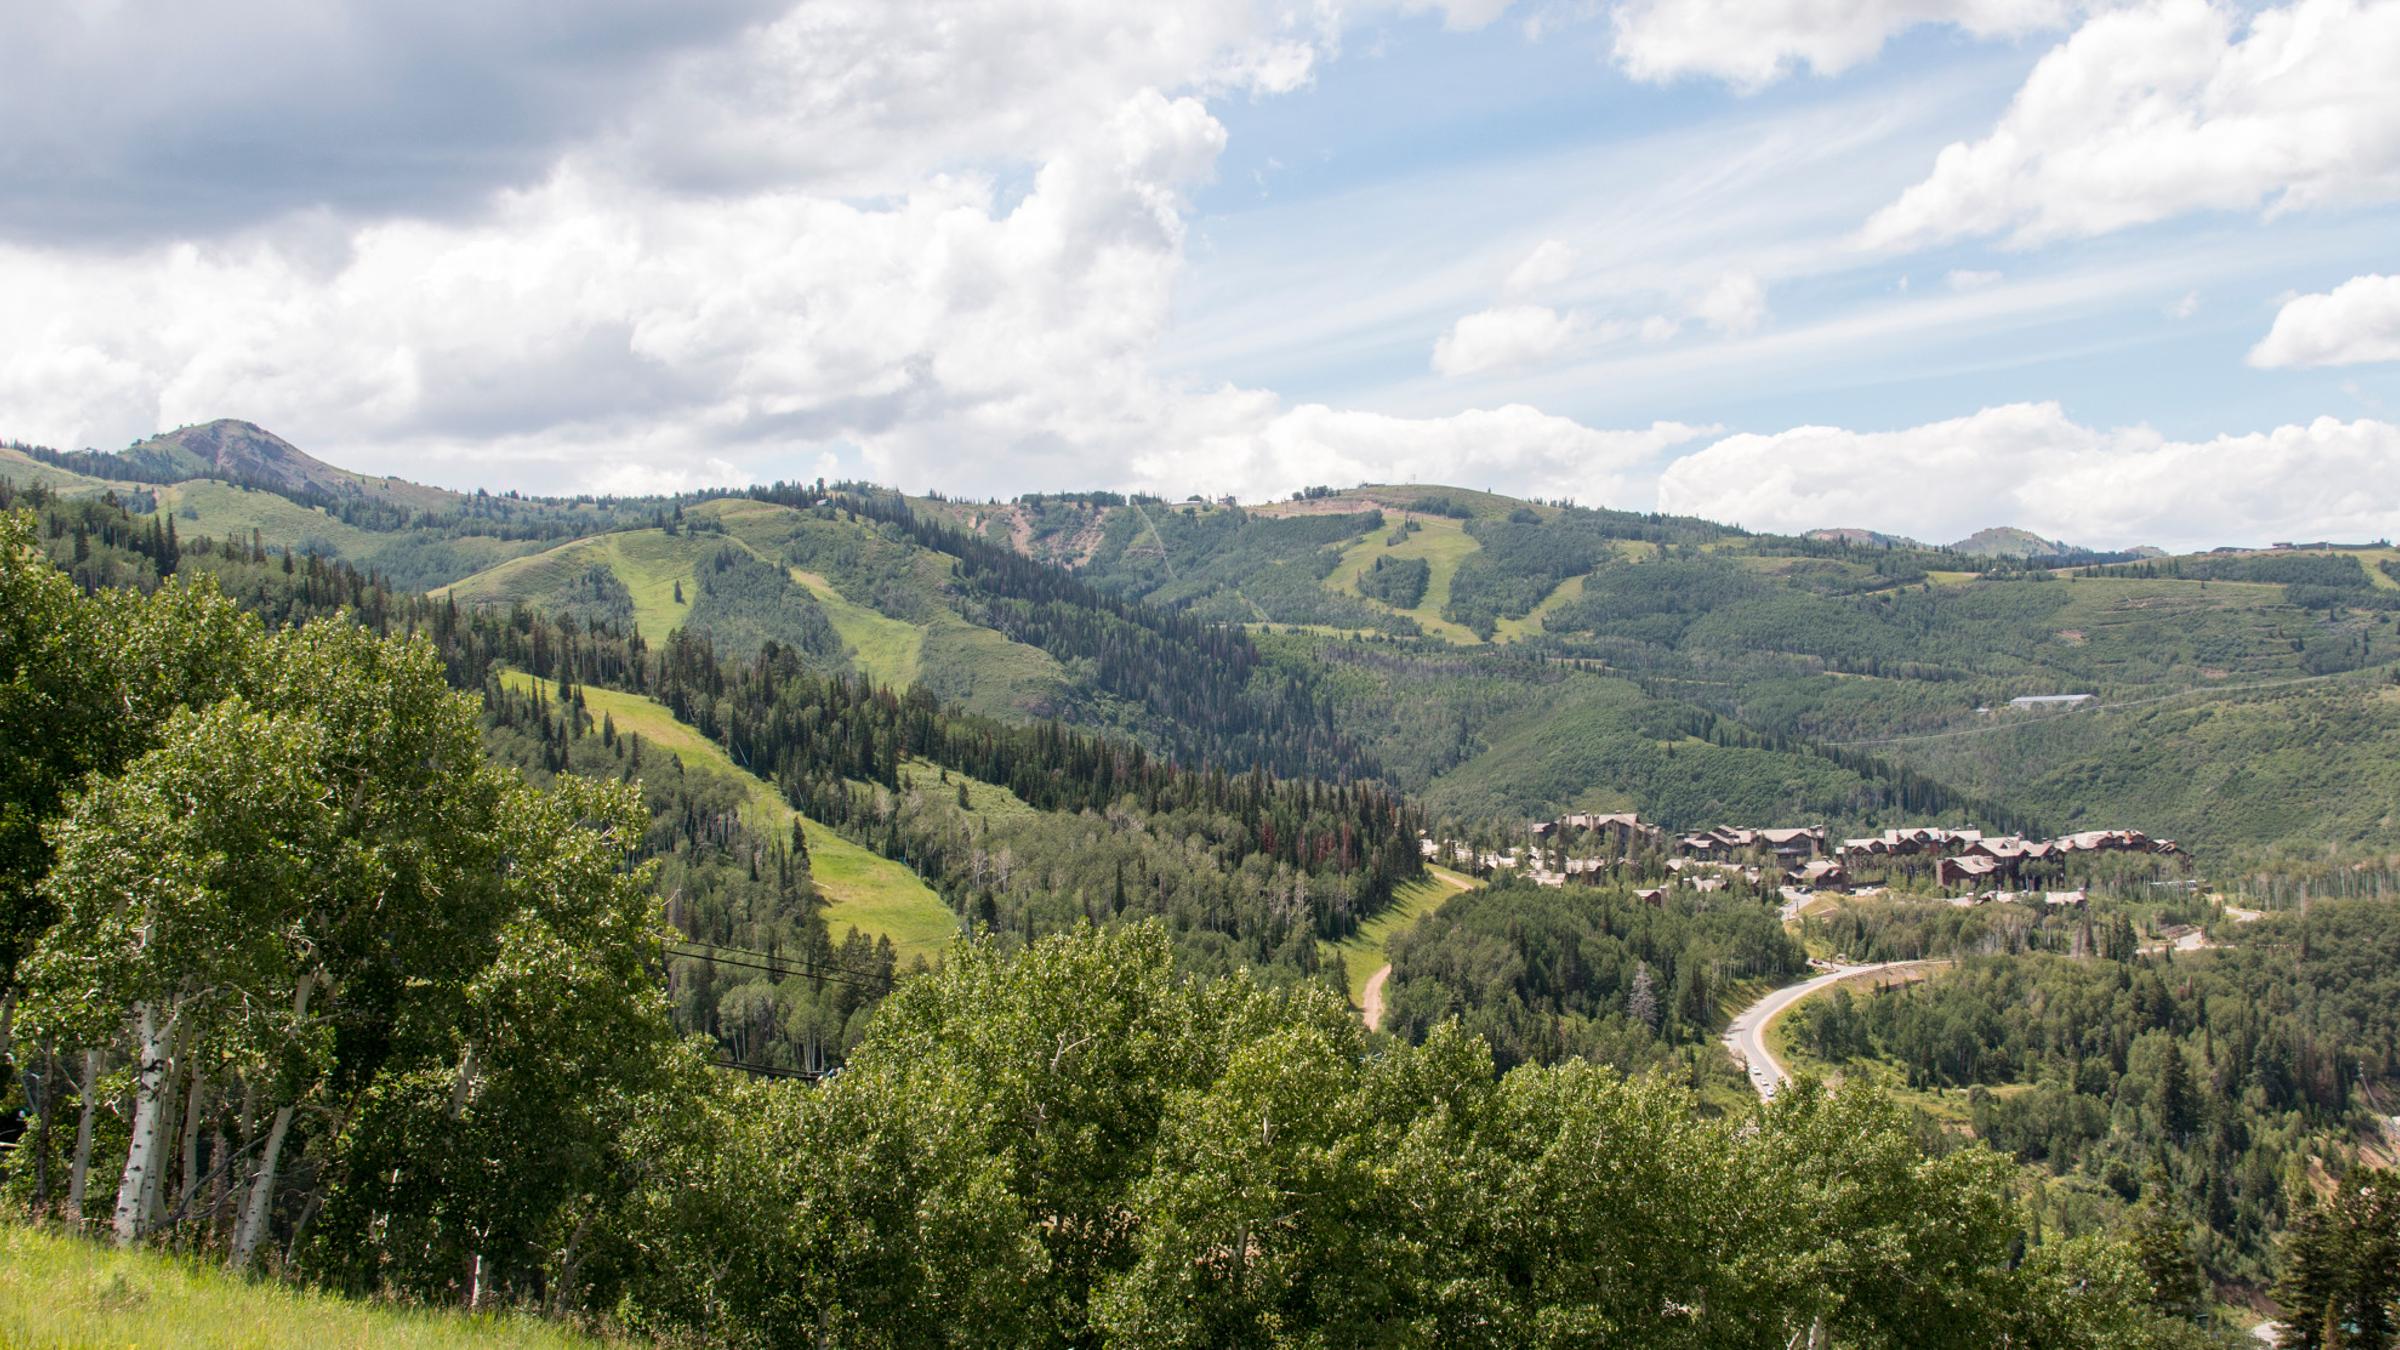 Deer Valley roads and mountains in the summer